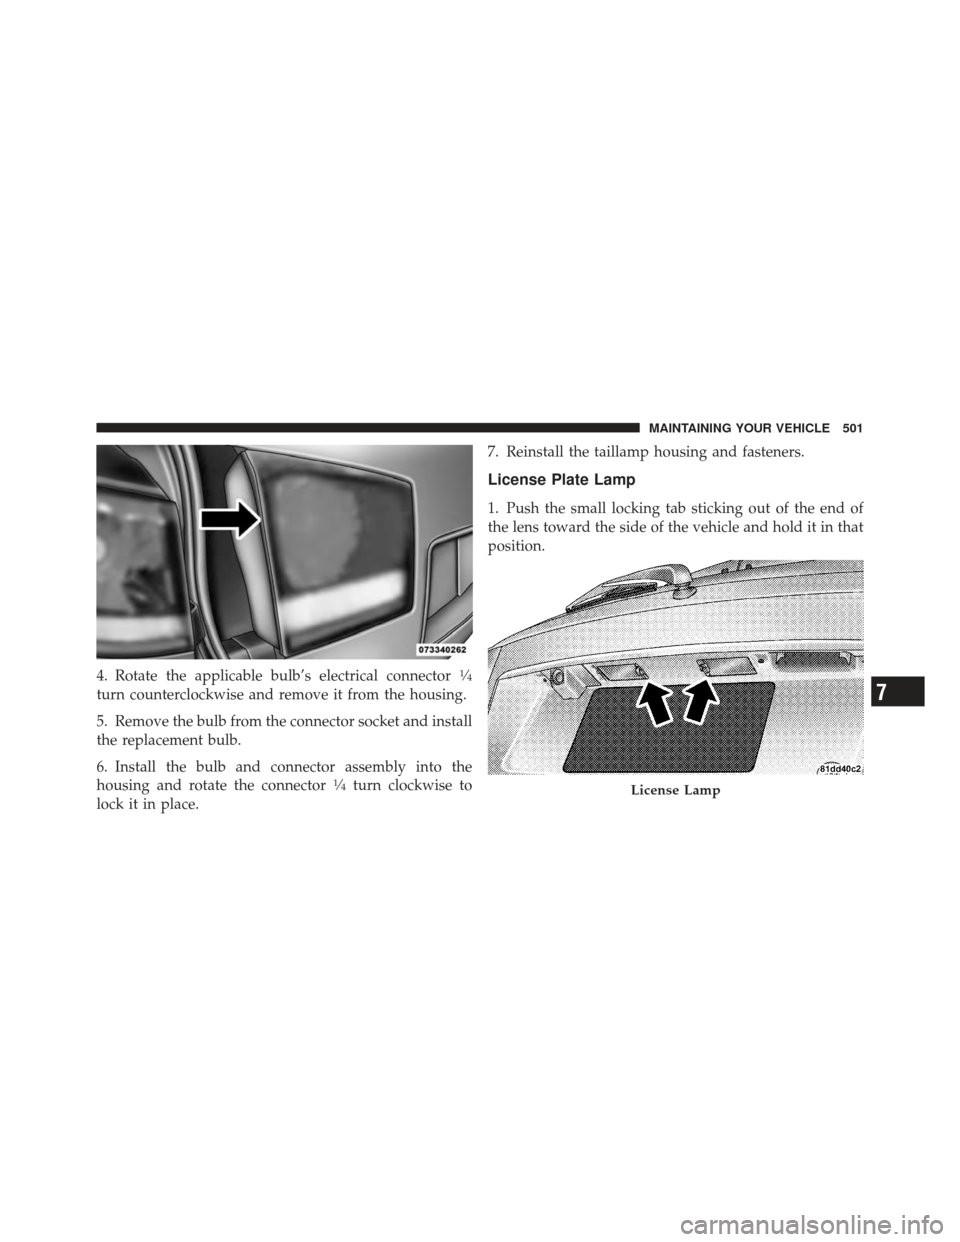 DODGE JOURNEY 2011 1.G Owners Manual 4. Rotate the applicable bulb’s electrical connector1�4
turn counterclockwise and remove it from the housing.
5. Remove the bulb from the connector socket and install
the replacement bulb.
6. Instal